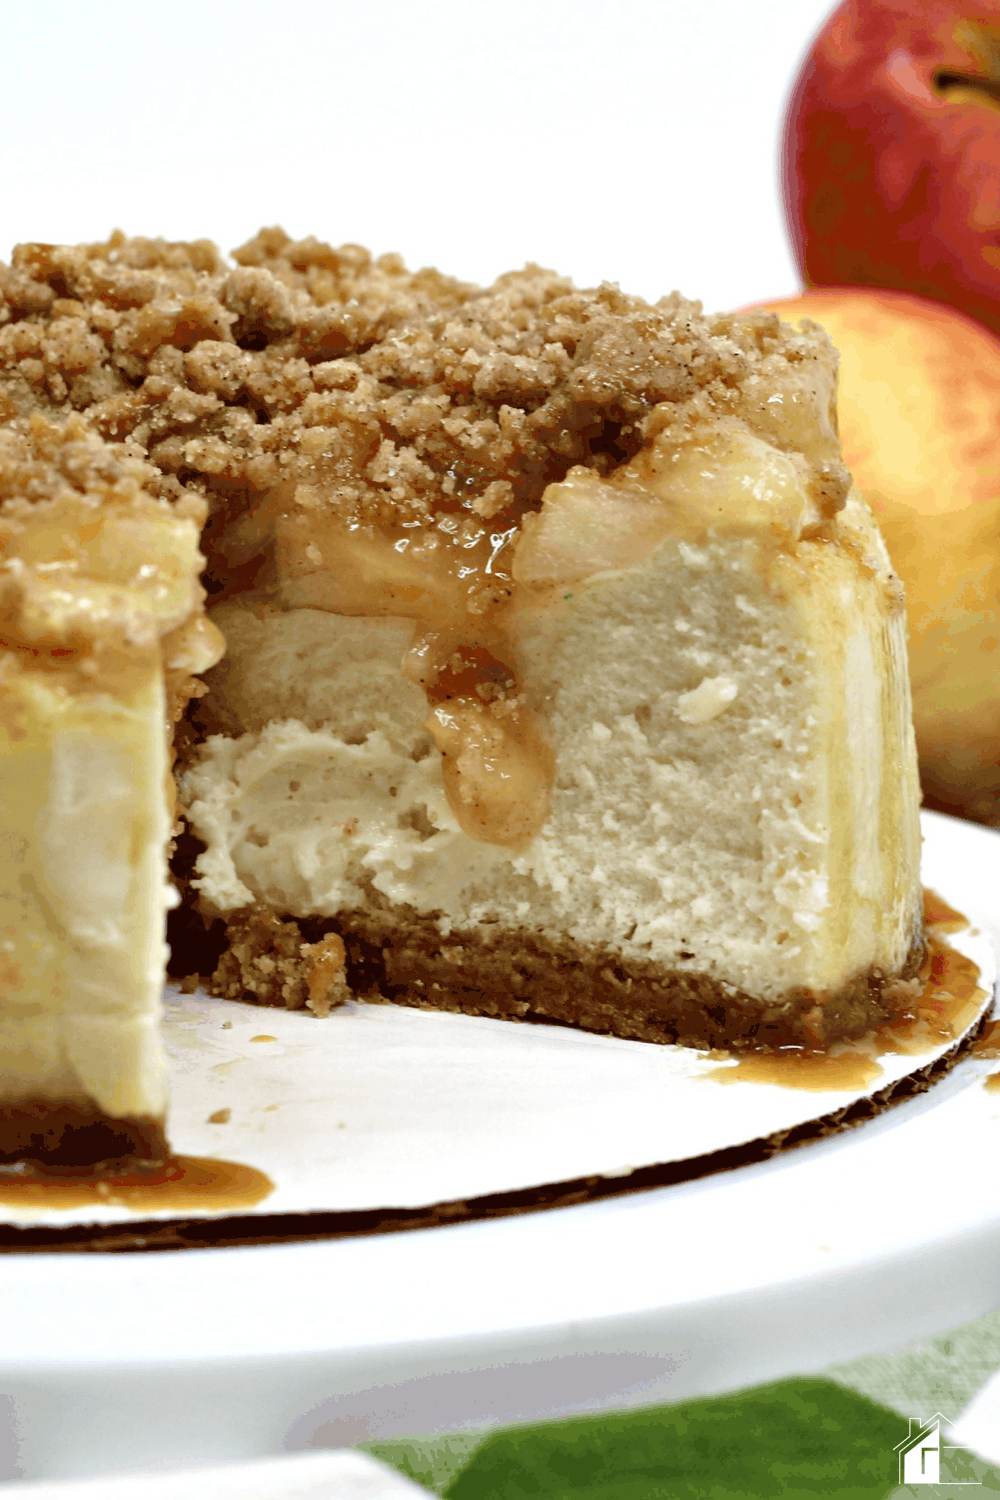 The best of both worlds, apple crumble and cheesecake made using an Instant Pot. Learn how to create this recipe in minutes. #instantpot #cheesecake #apple via @mystayathome